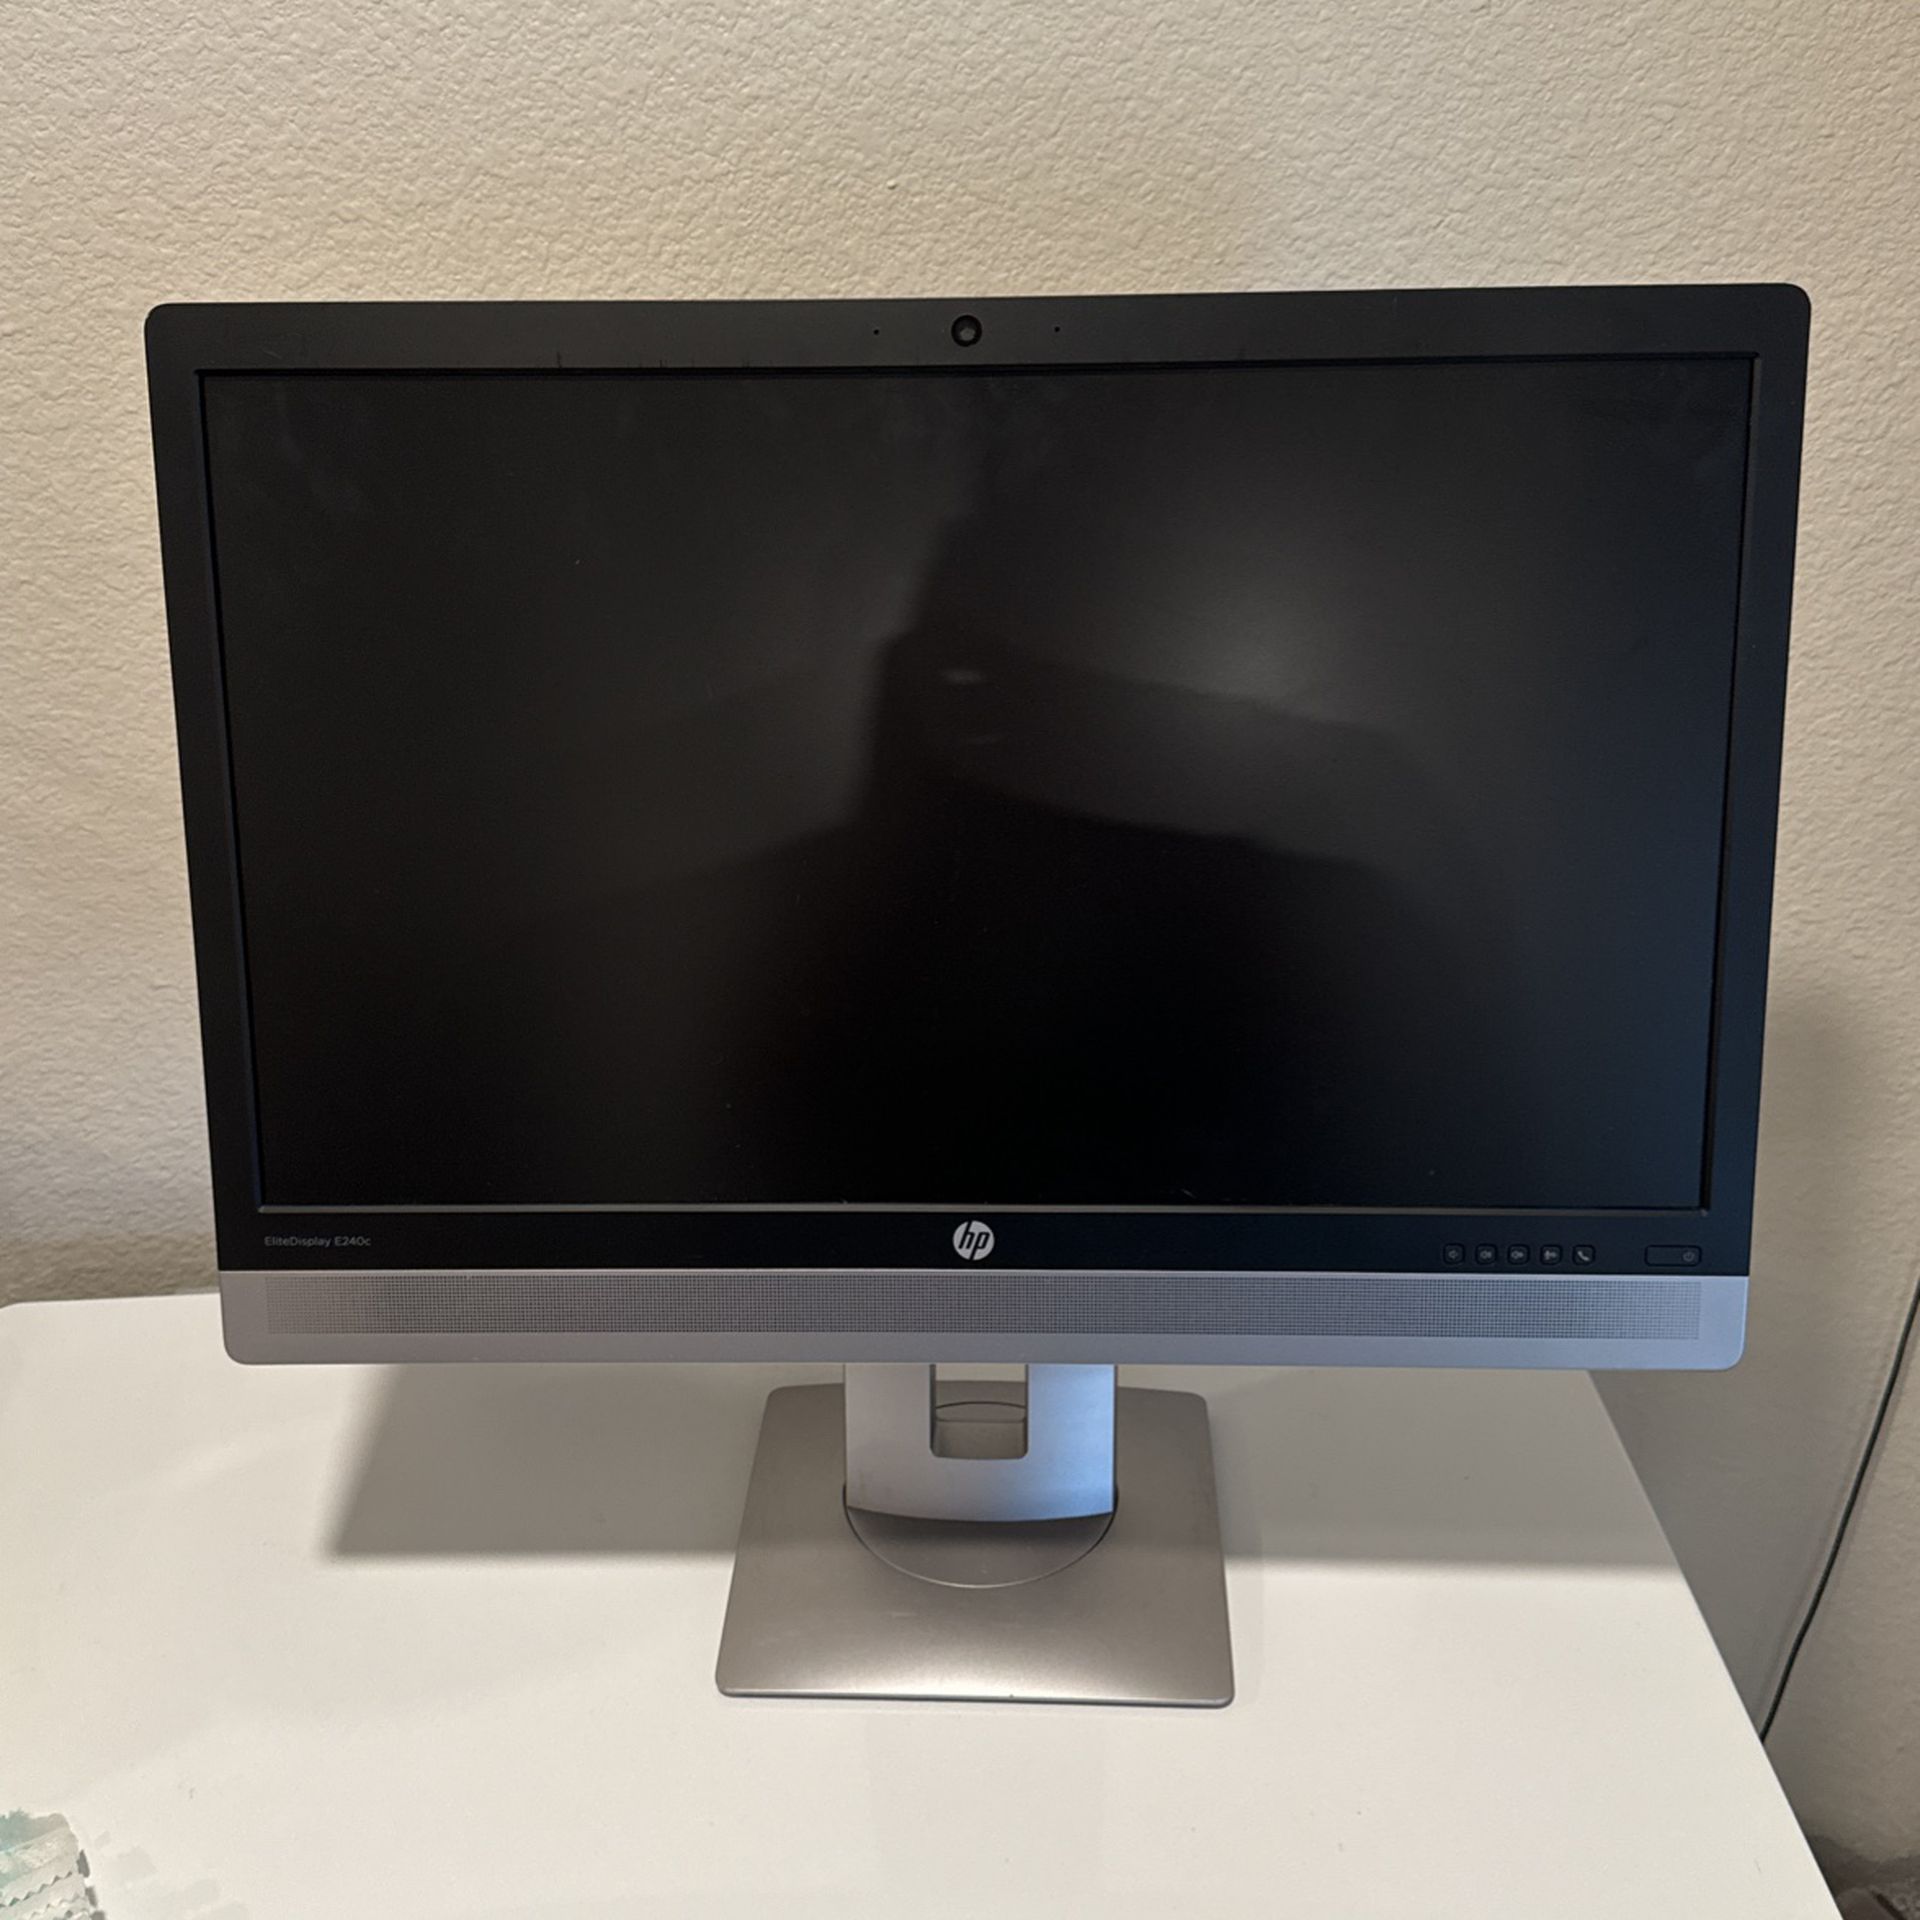 Hp Monitor Built in Webcam And Speakers